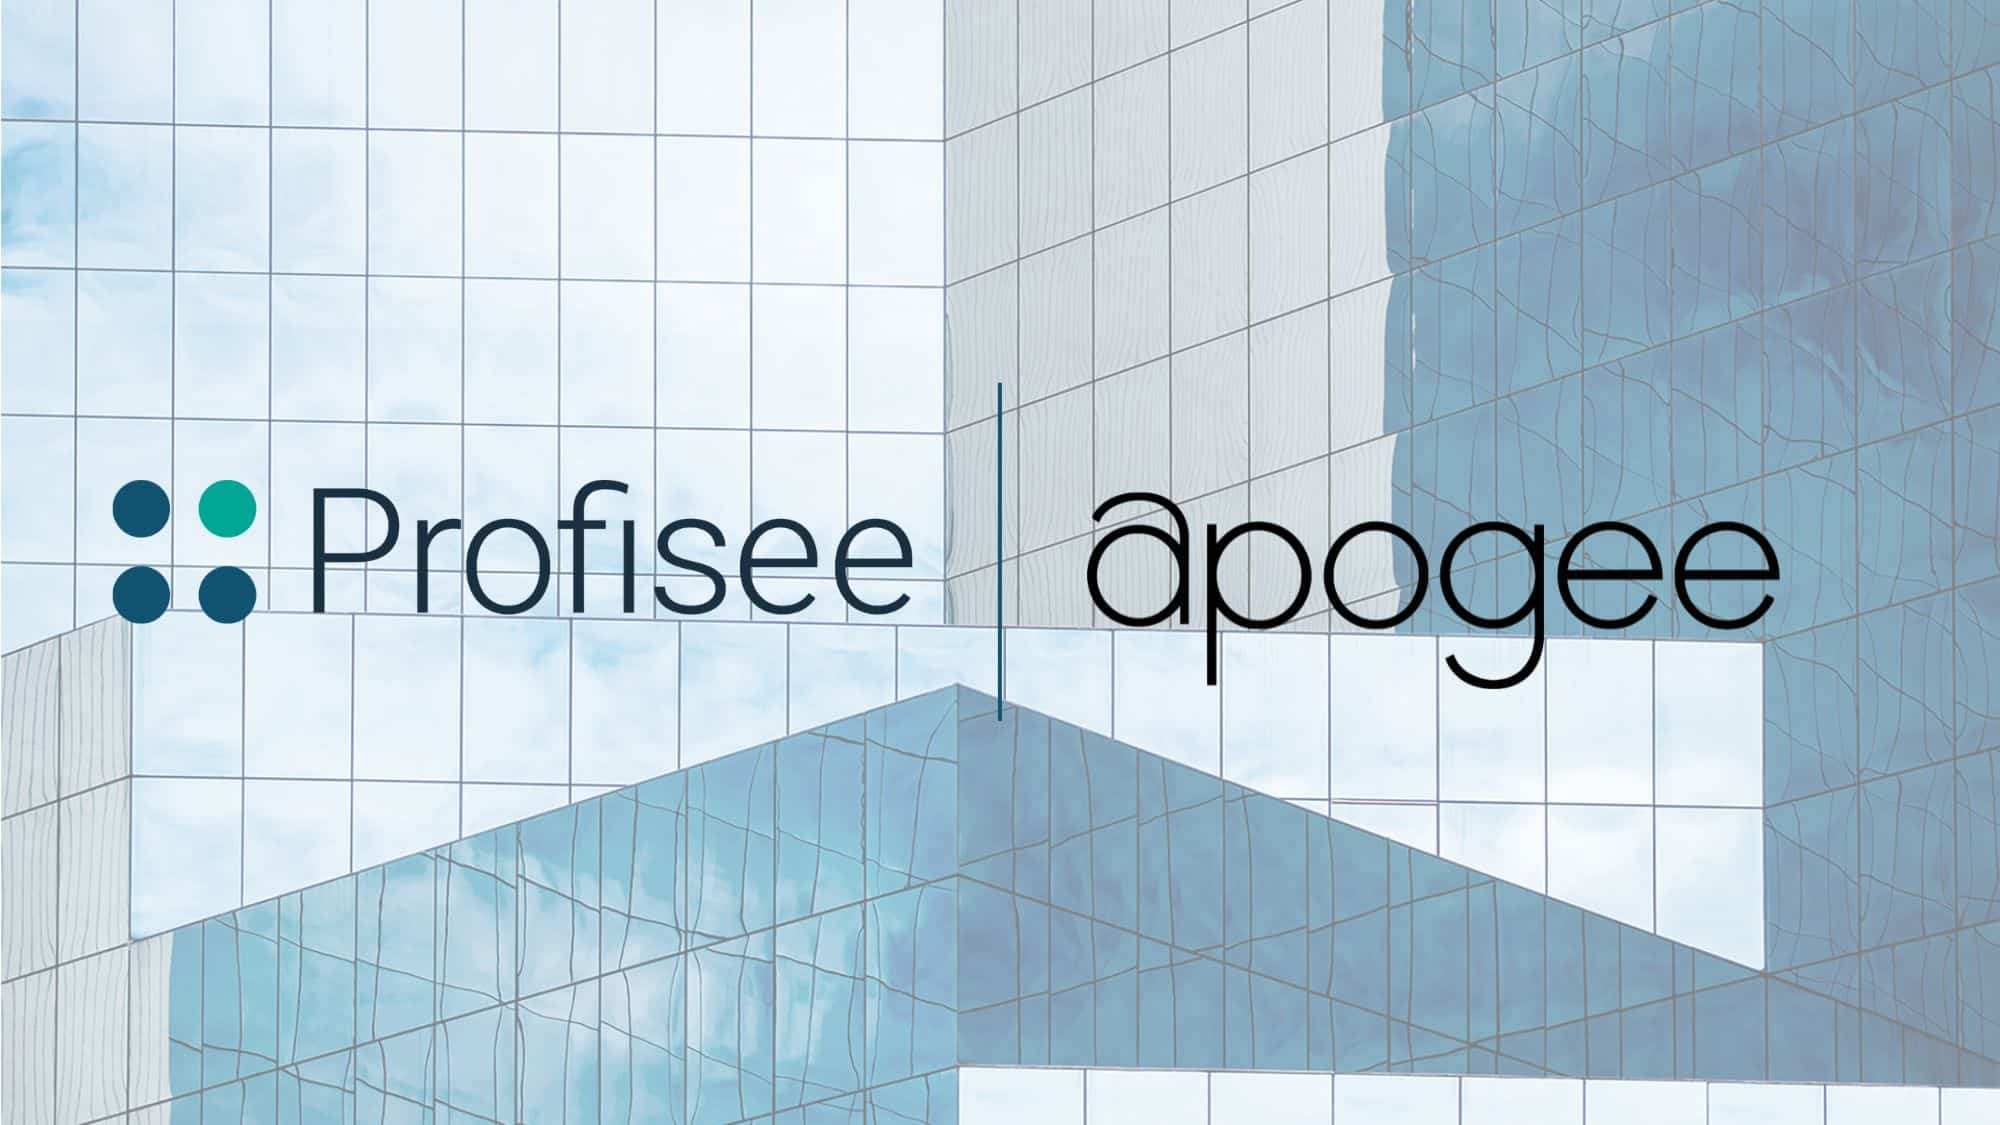 The logos for Profisee and Apogee sit side-by-side against a high rise building.